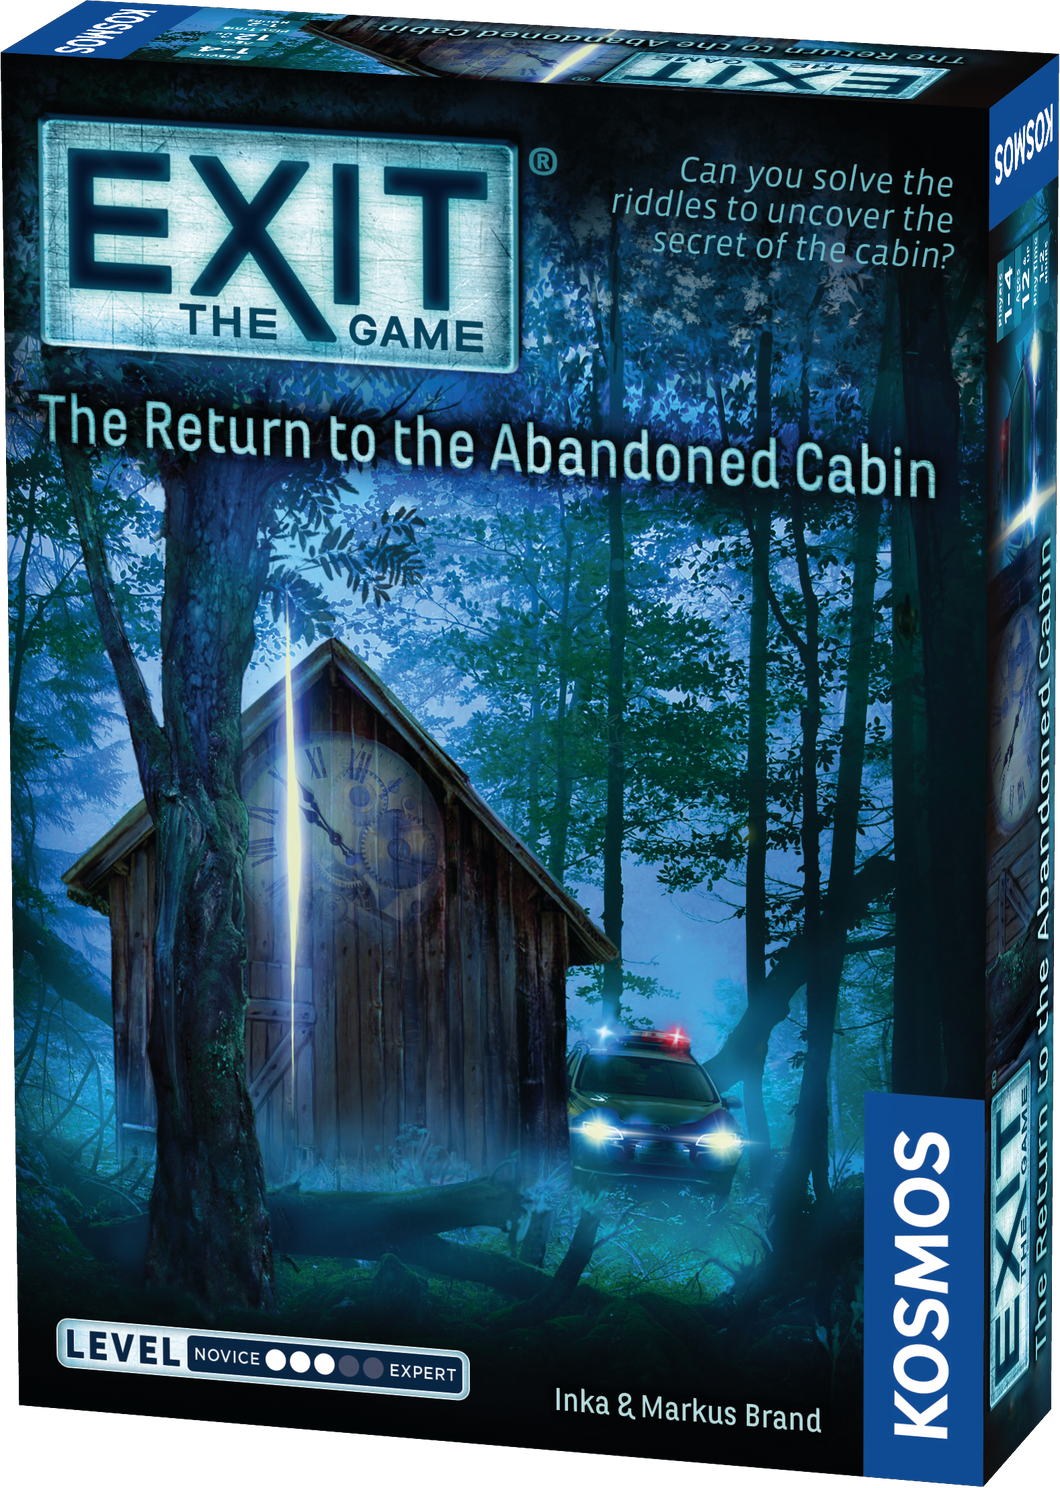 Exit The Return to the Abandoned Cabin